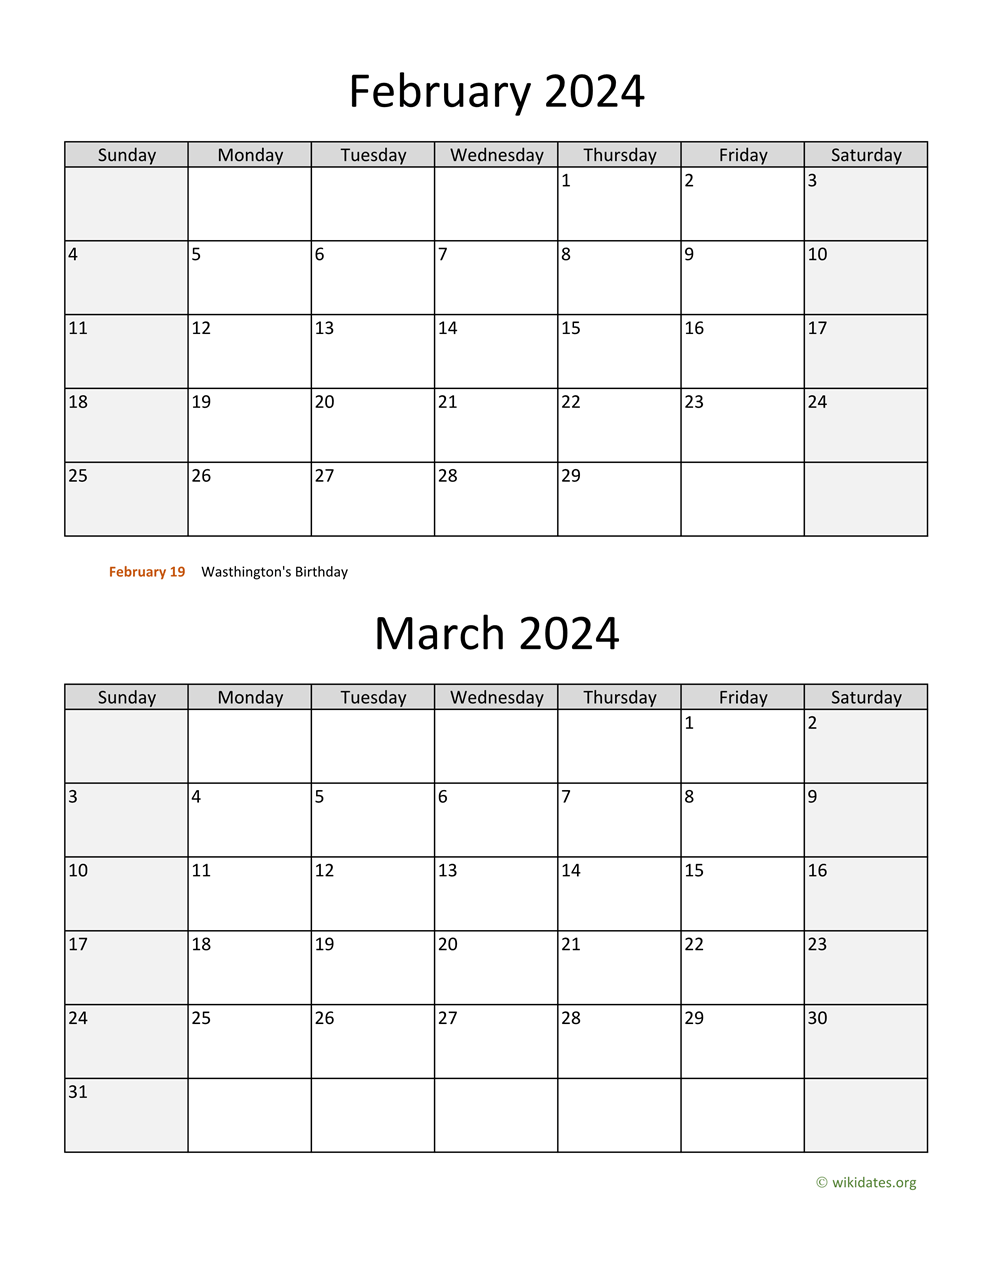 February And March 2024 Calendar | Wikidates for Printable Calendar 2024 February March